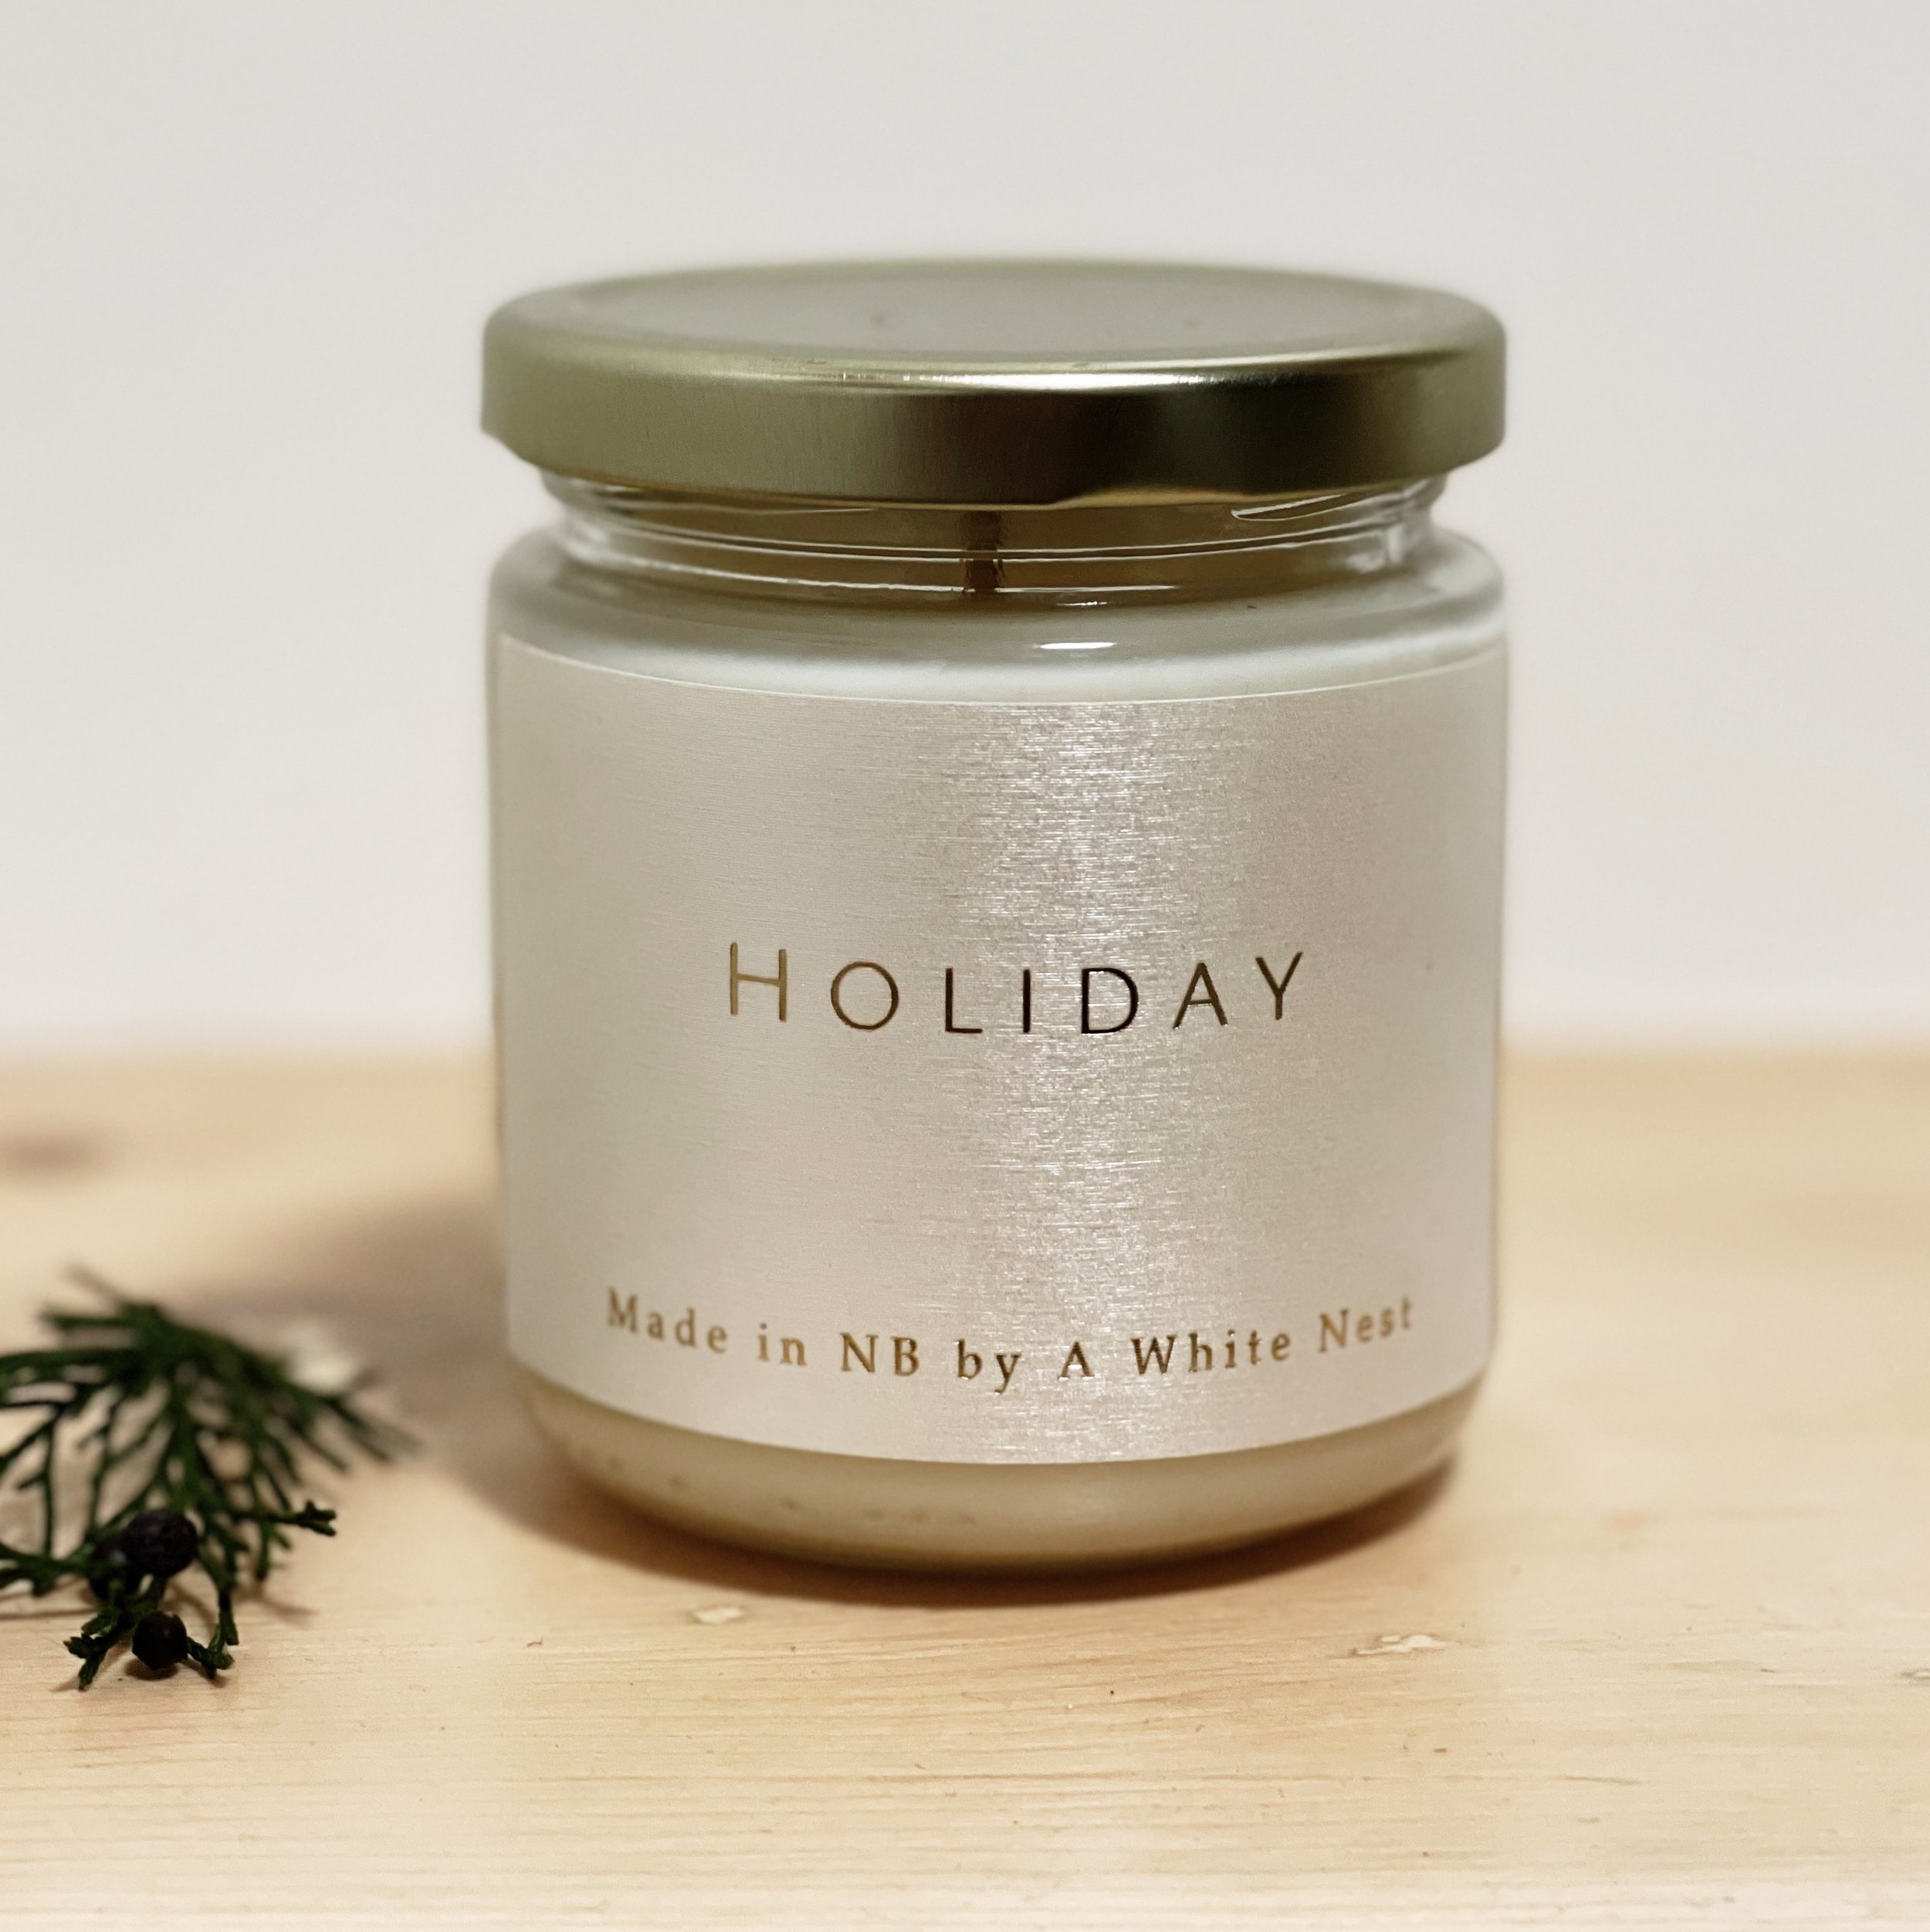 Holiday Scented Candle - $20.00